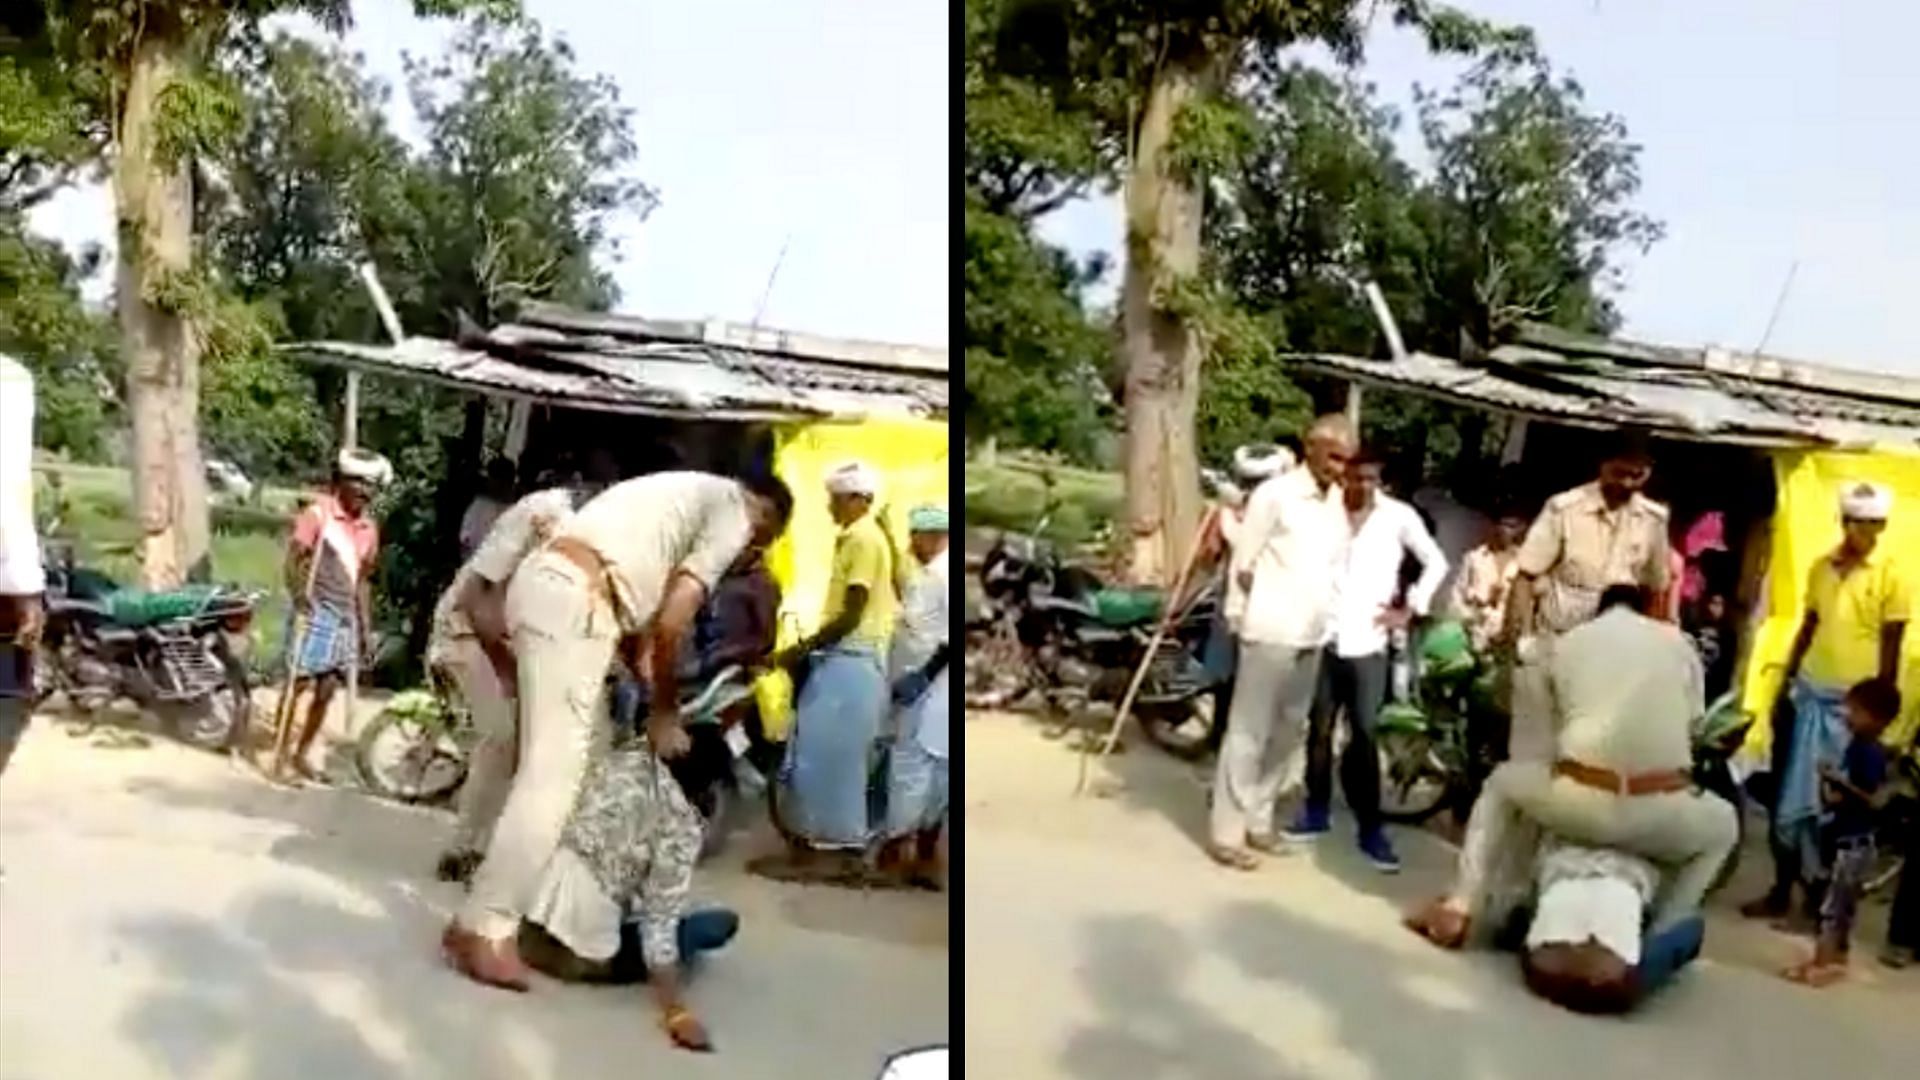 A man was thrashed, dragged on road and slapped by two policemen in Uttar Pradesh’s Siddharth Nagar district on Tuesday,10 September.